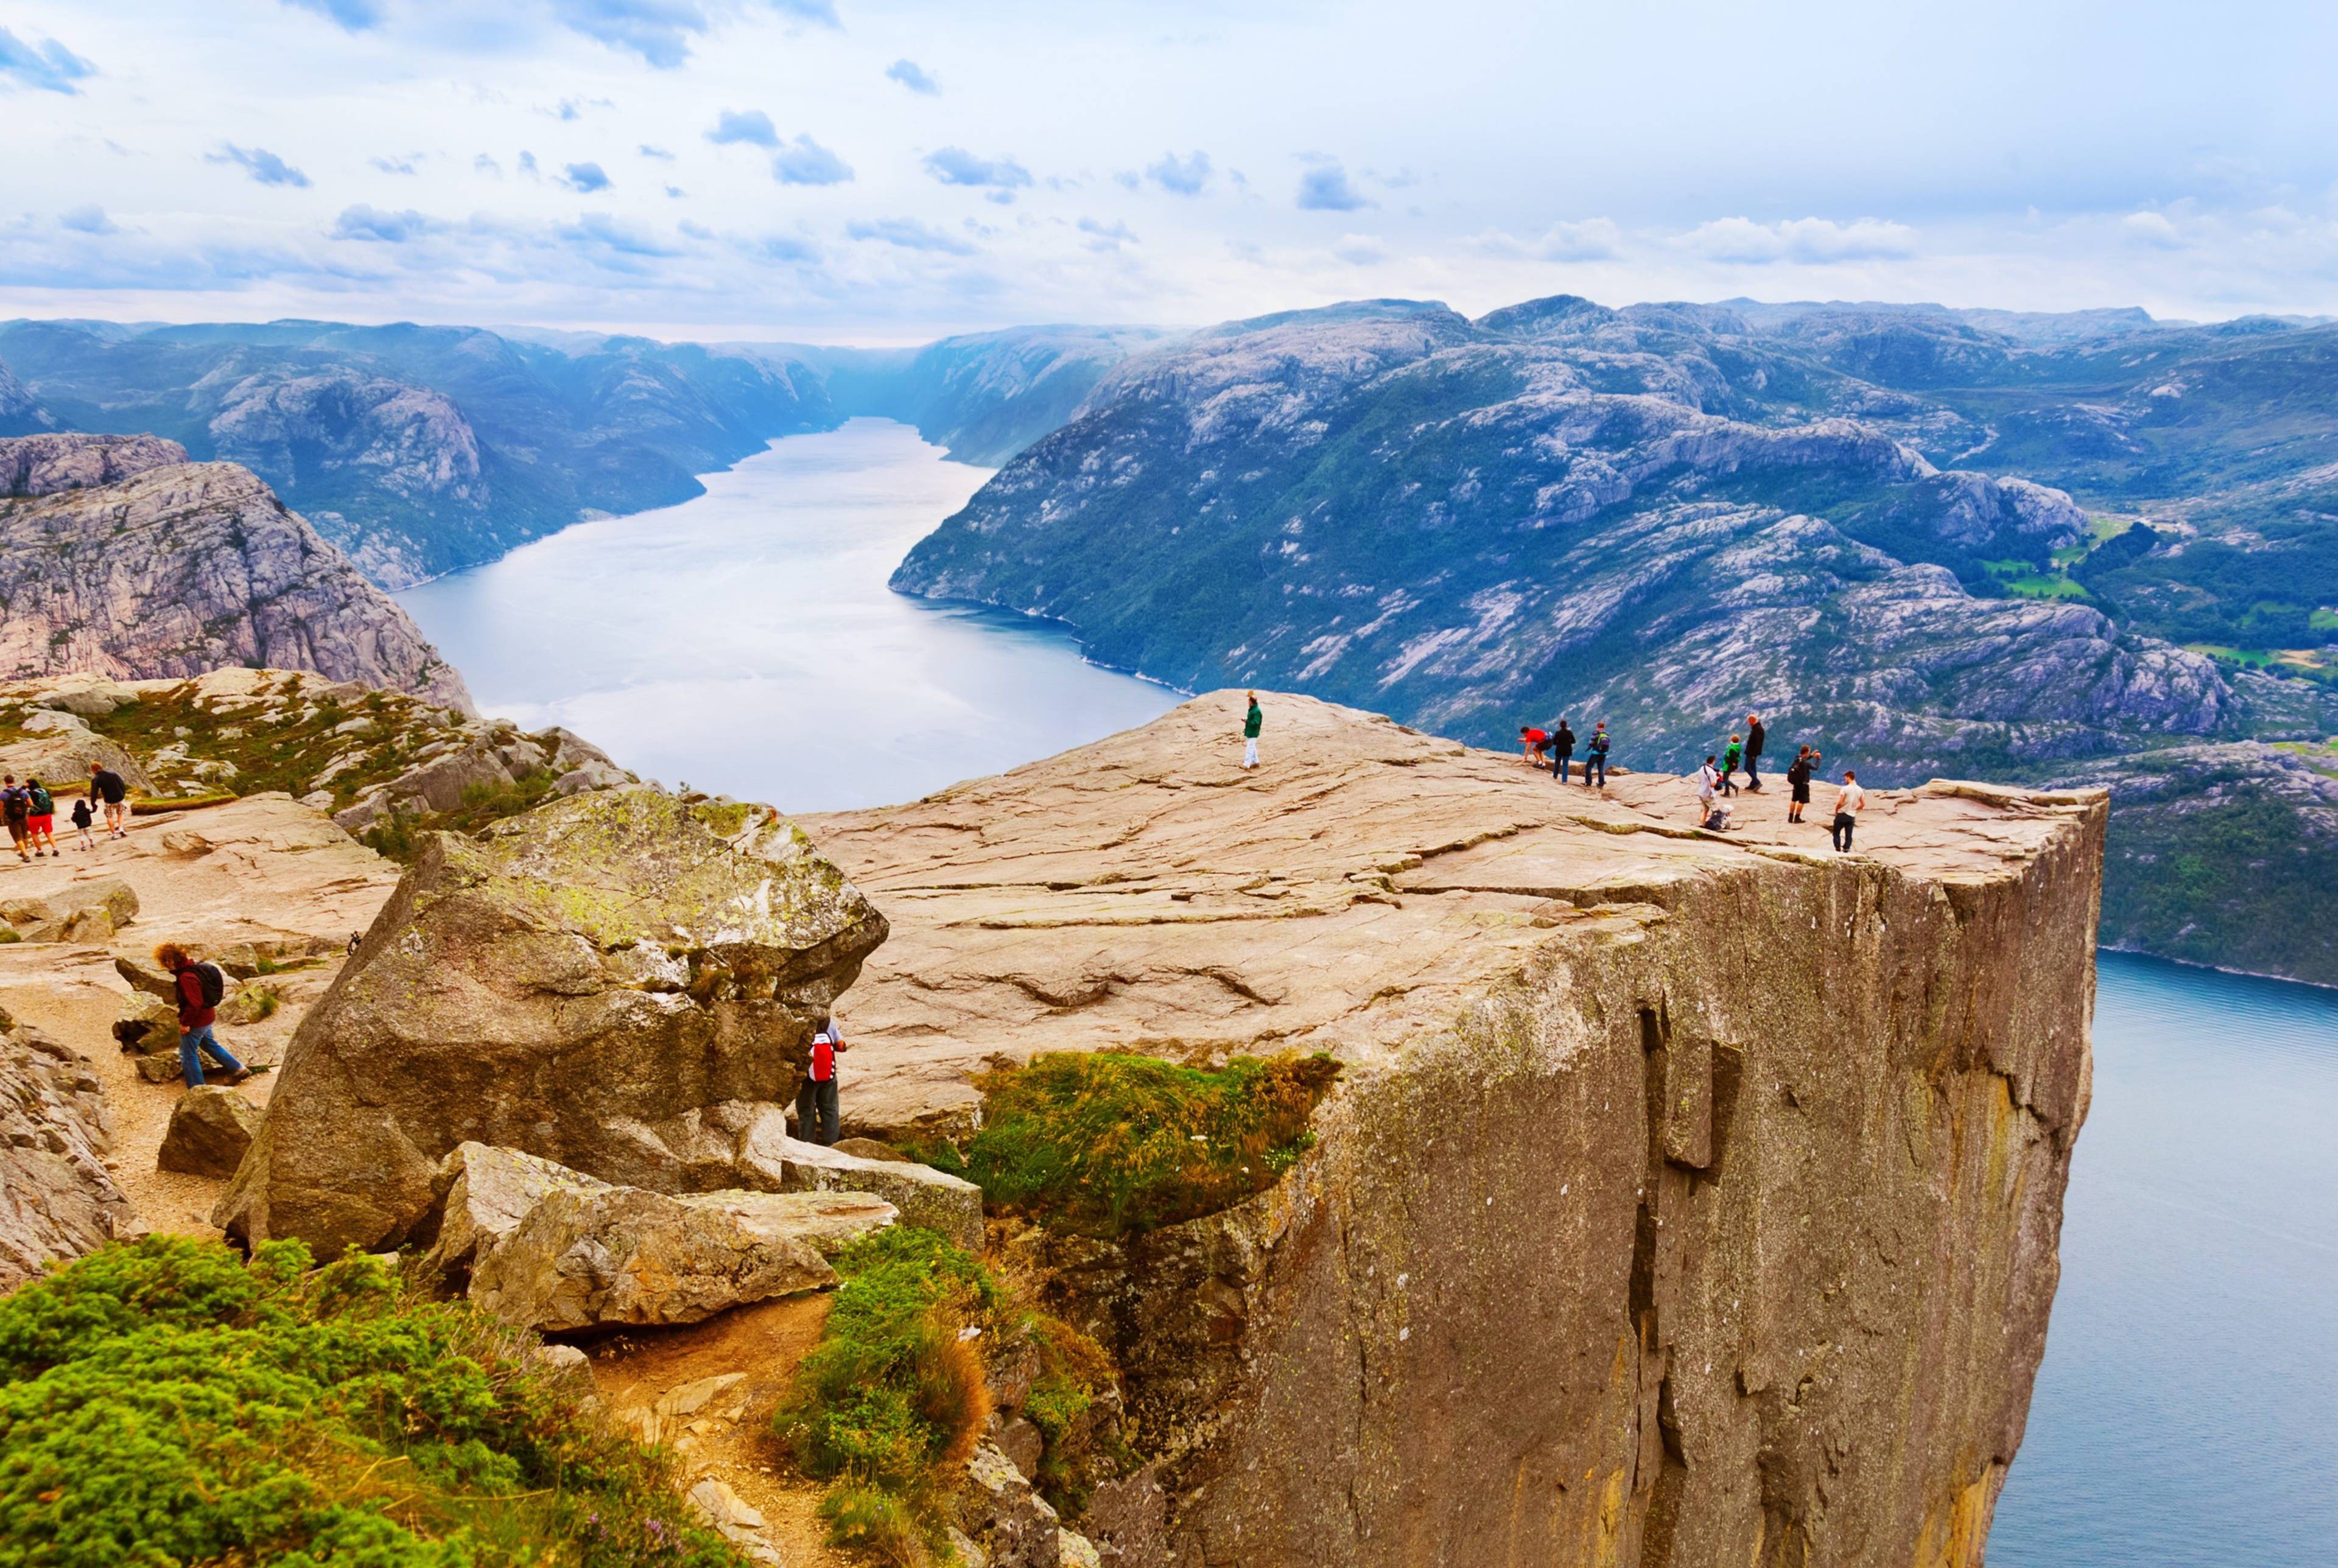 Historical Insights and Unforgettable Hikes from Bergen to Stavanger